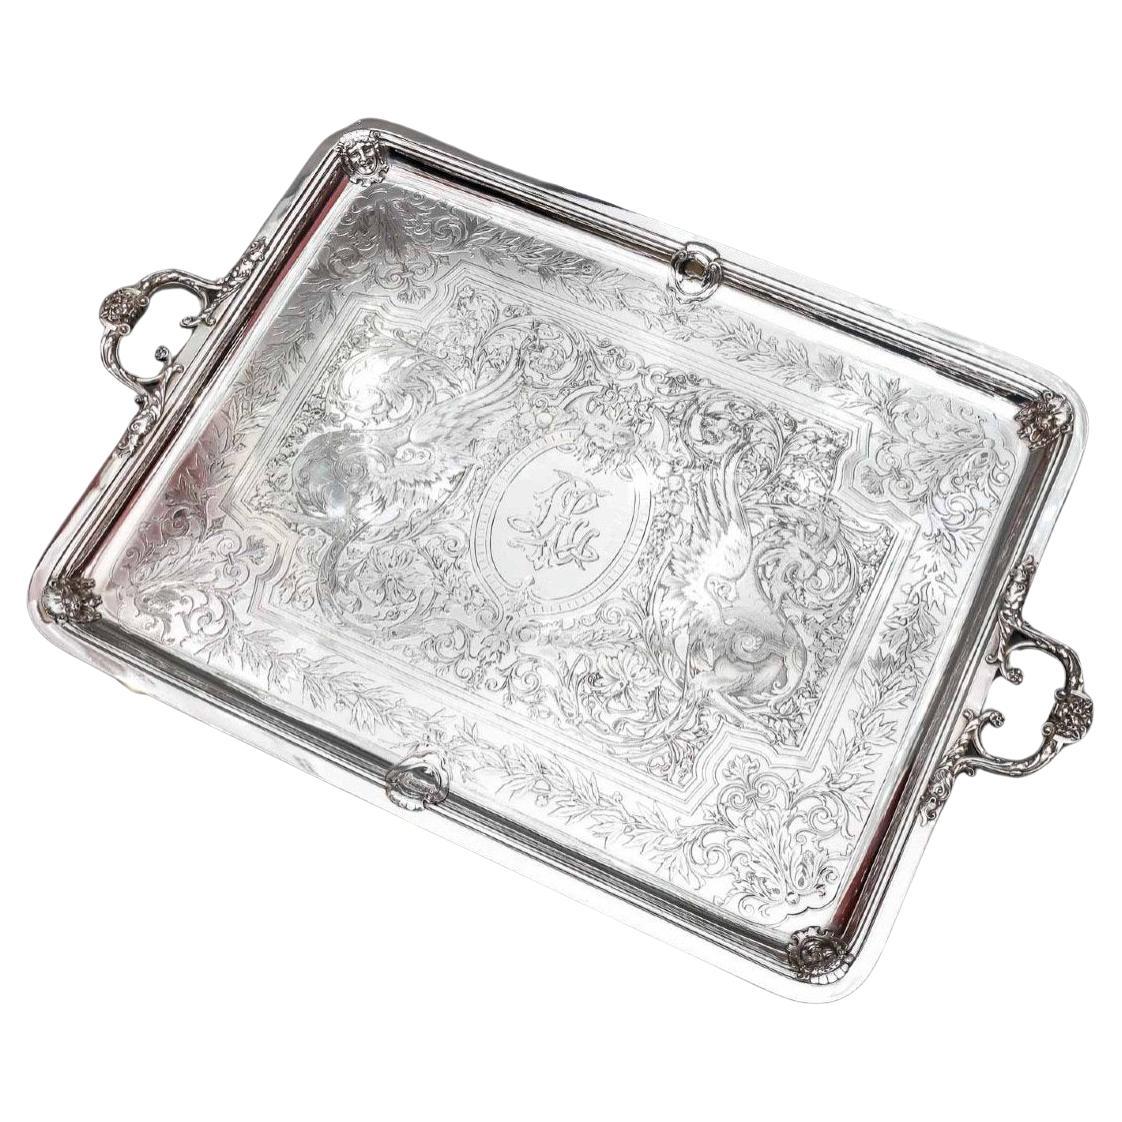 J. Piault – large 19th century solid silver serving tray For Sale